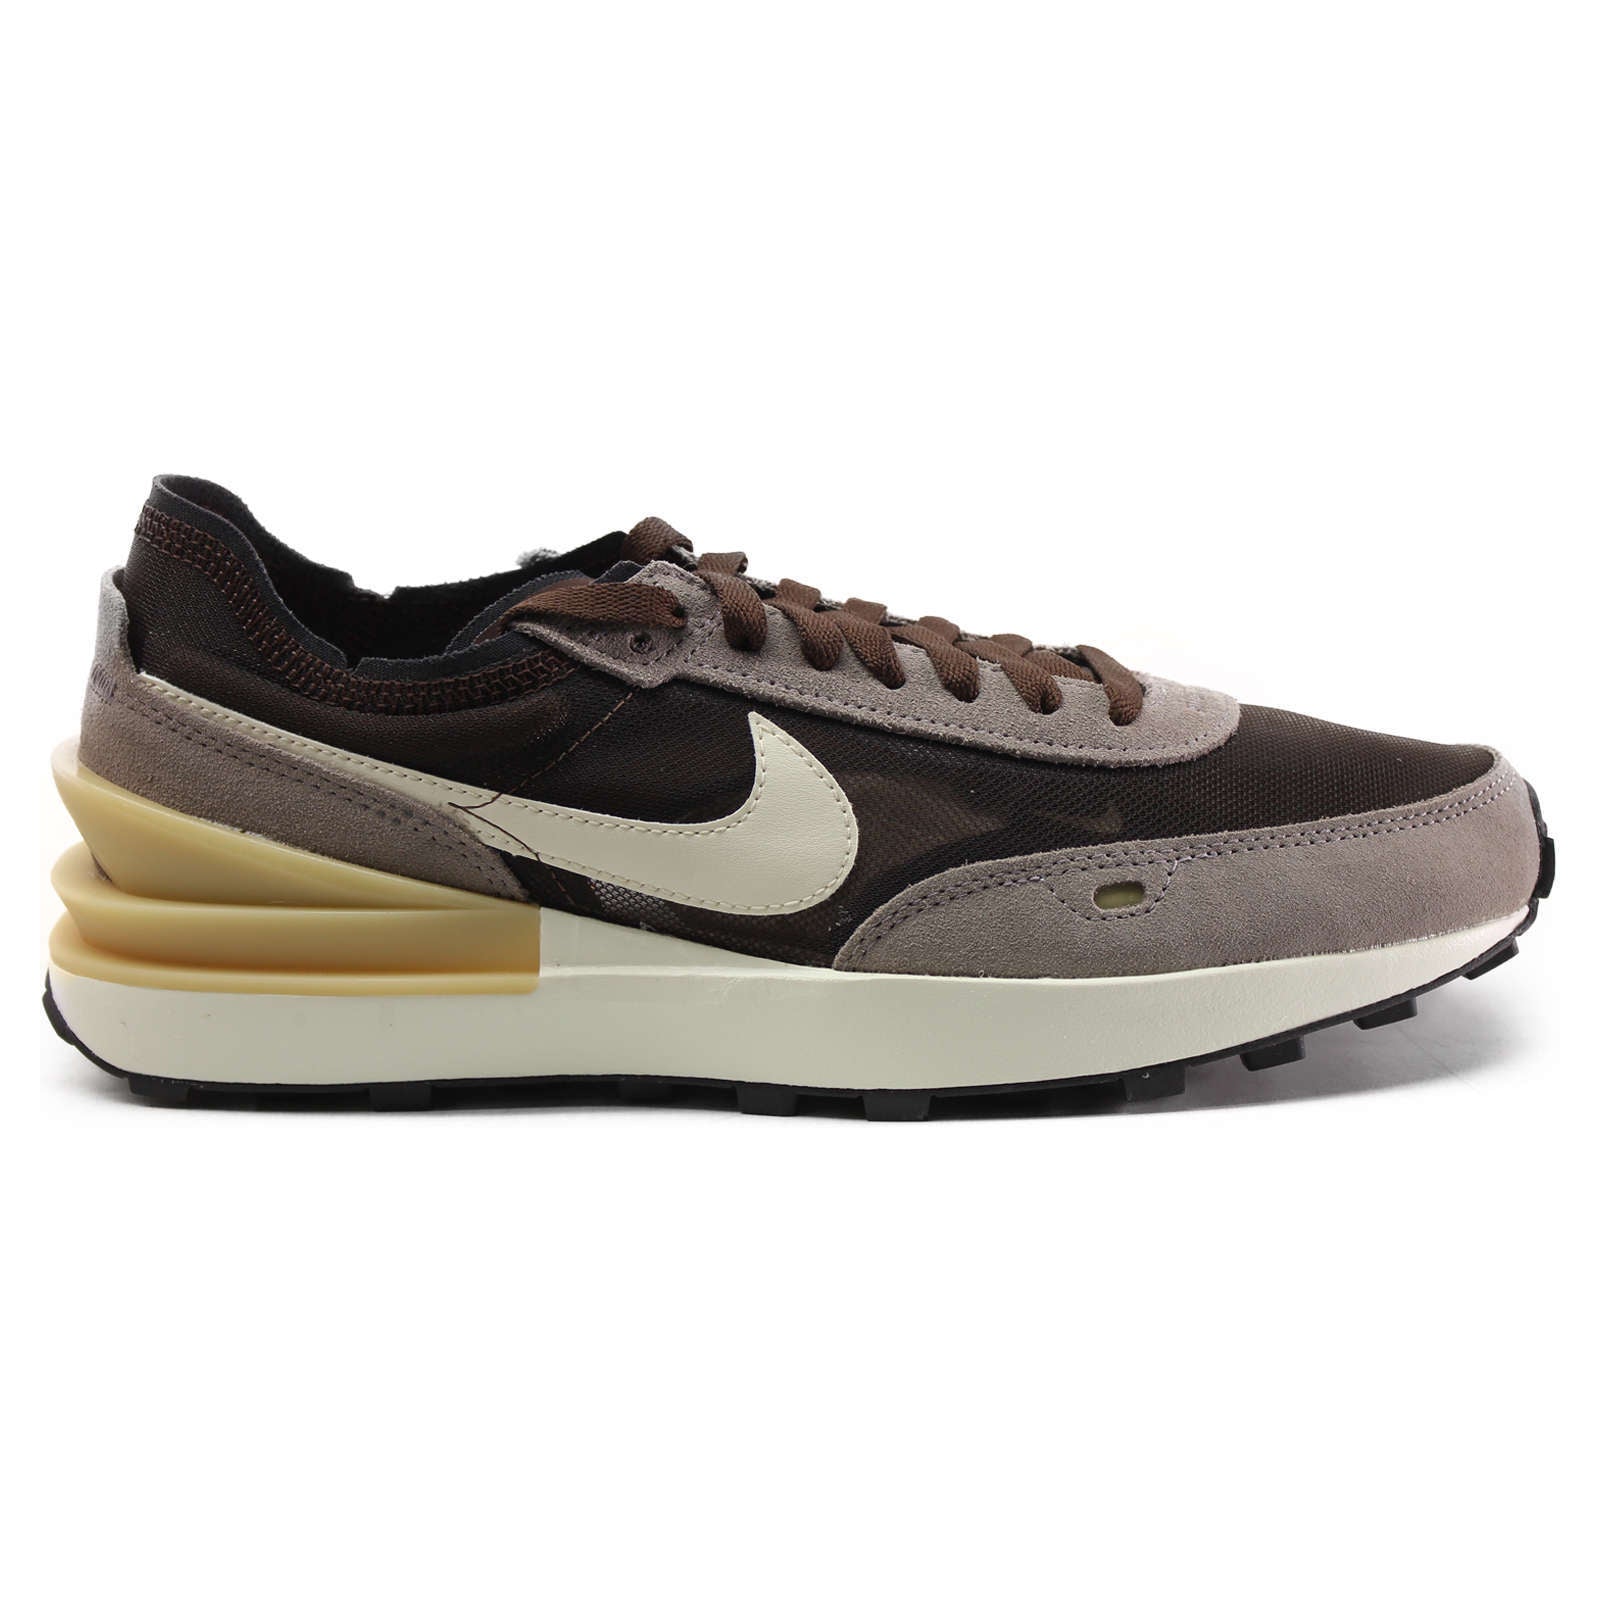 Nike Waffle One Leather Textile Men's Low-Top Sneakers#color_light chocolate natural